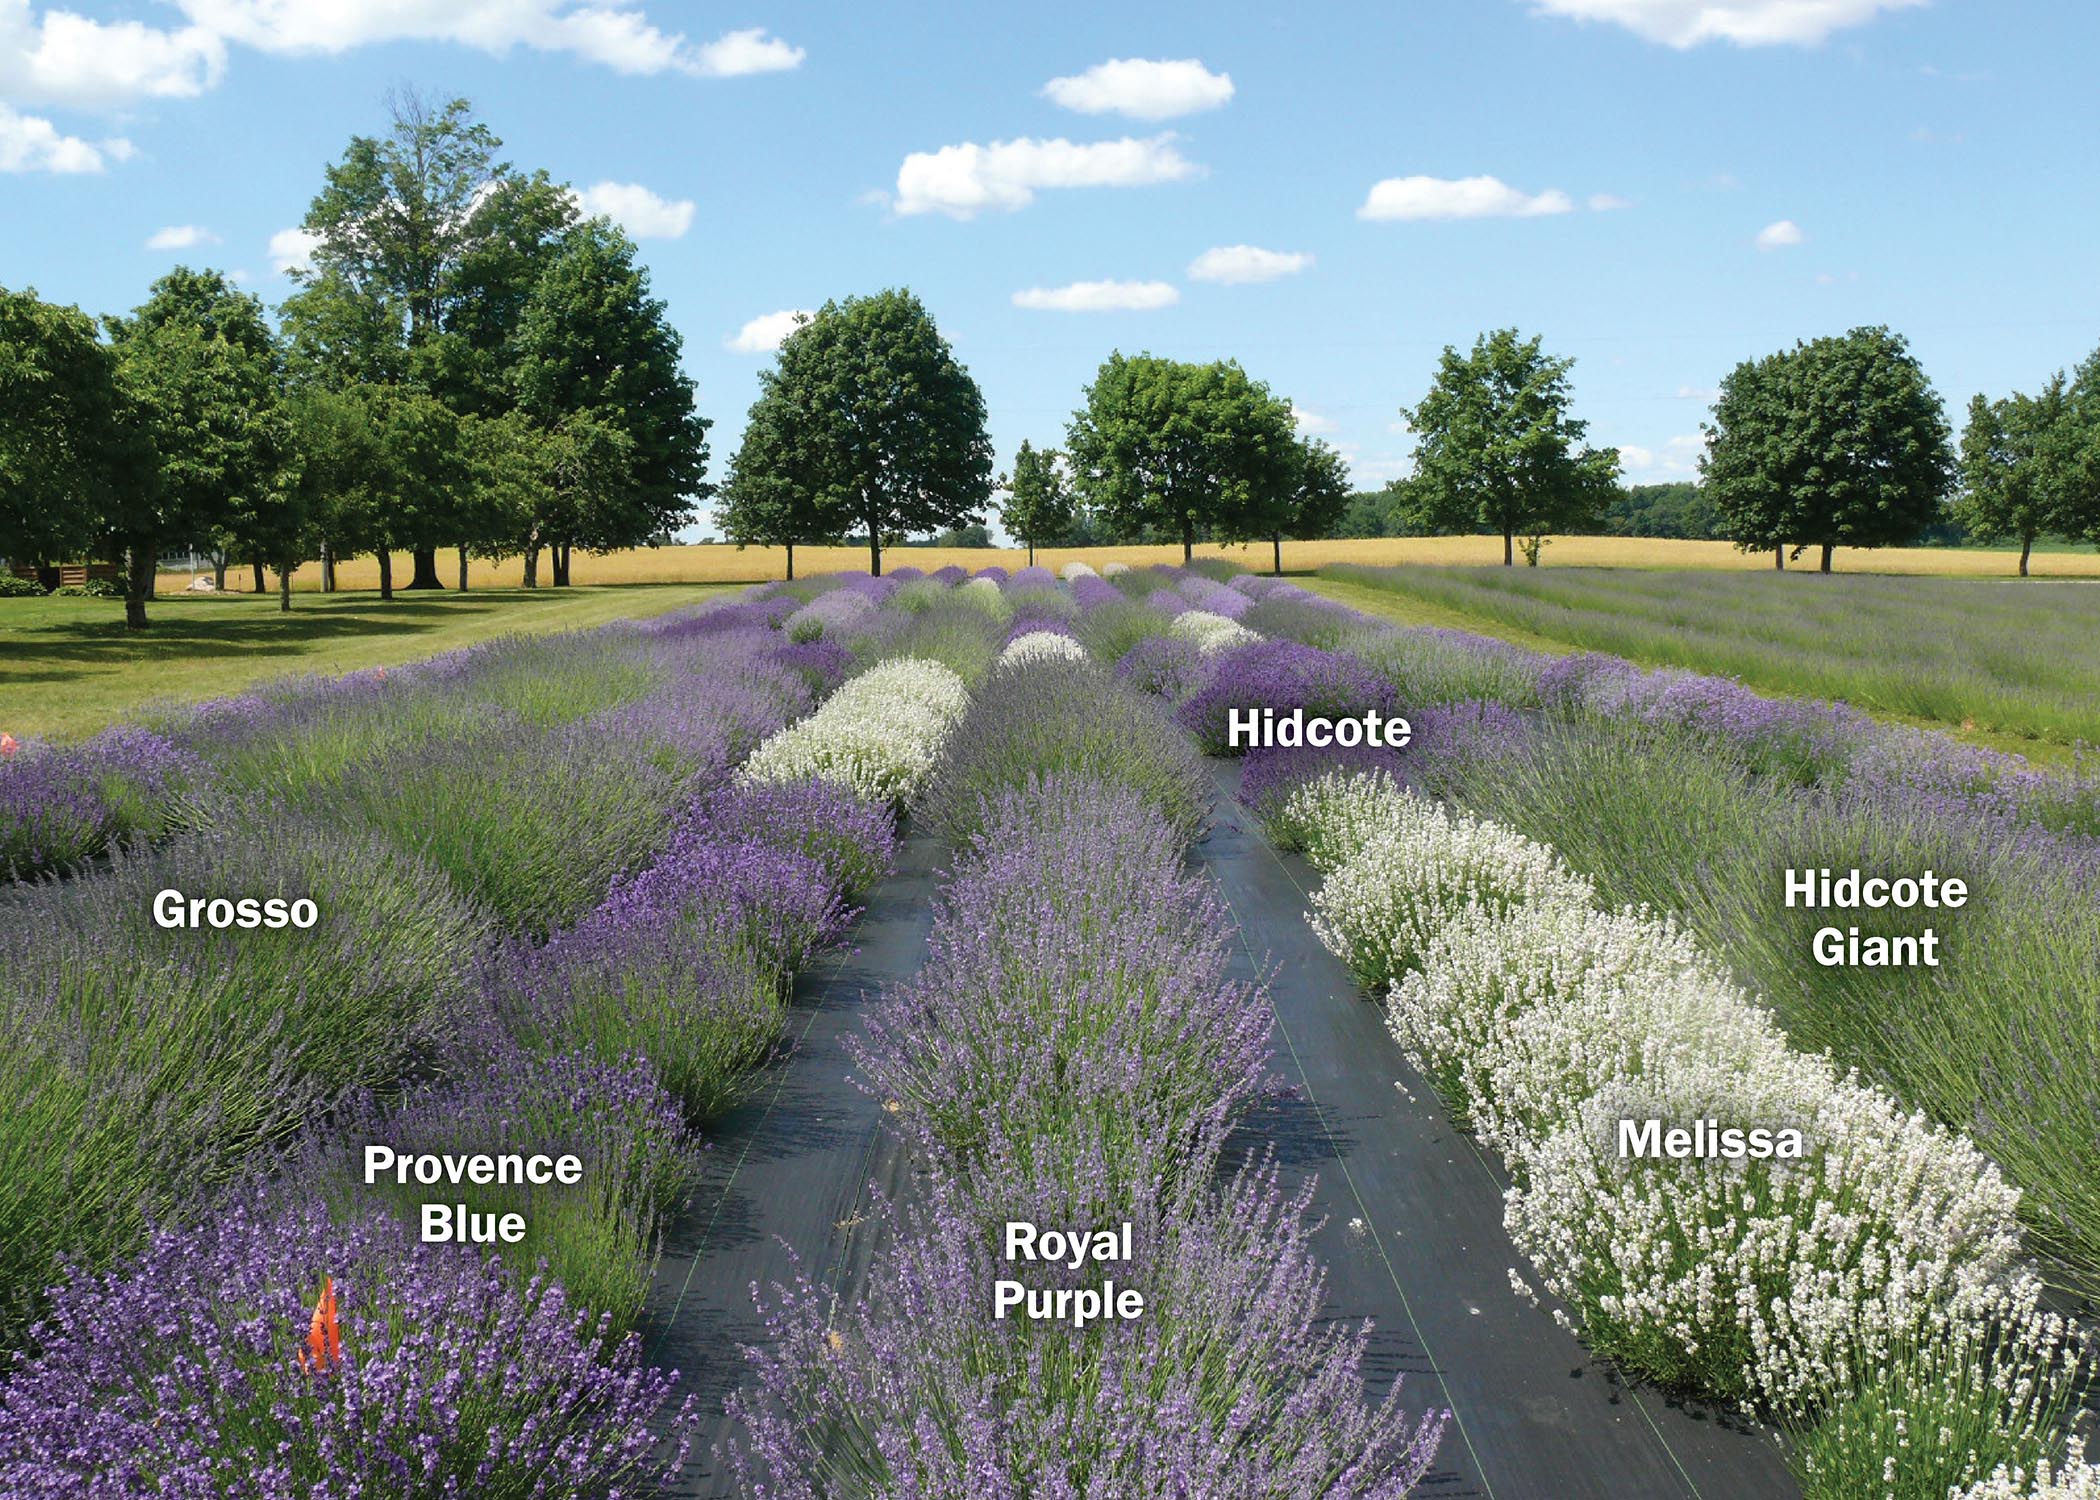 A cultivar trial site with seven rows of lavender and a variety of lavender cultivars in bloom.